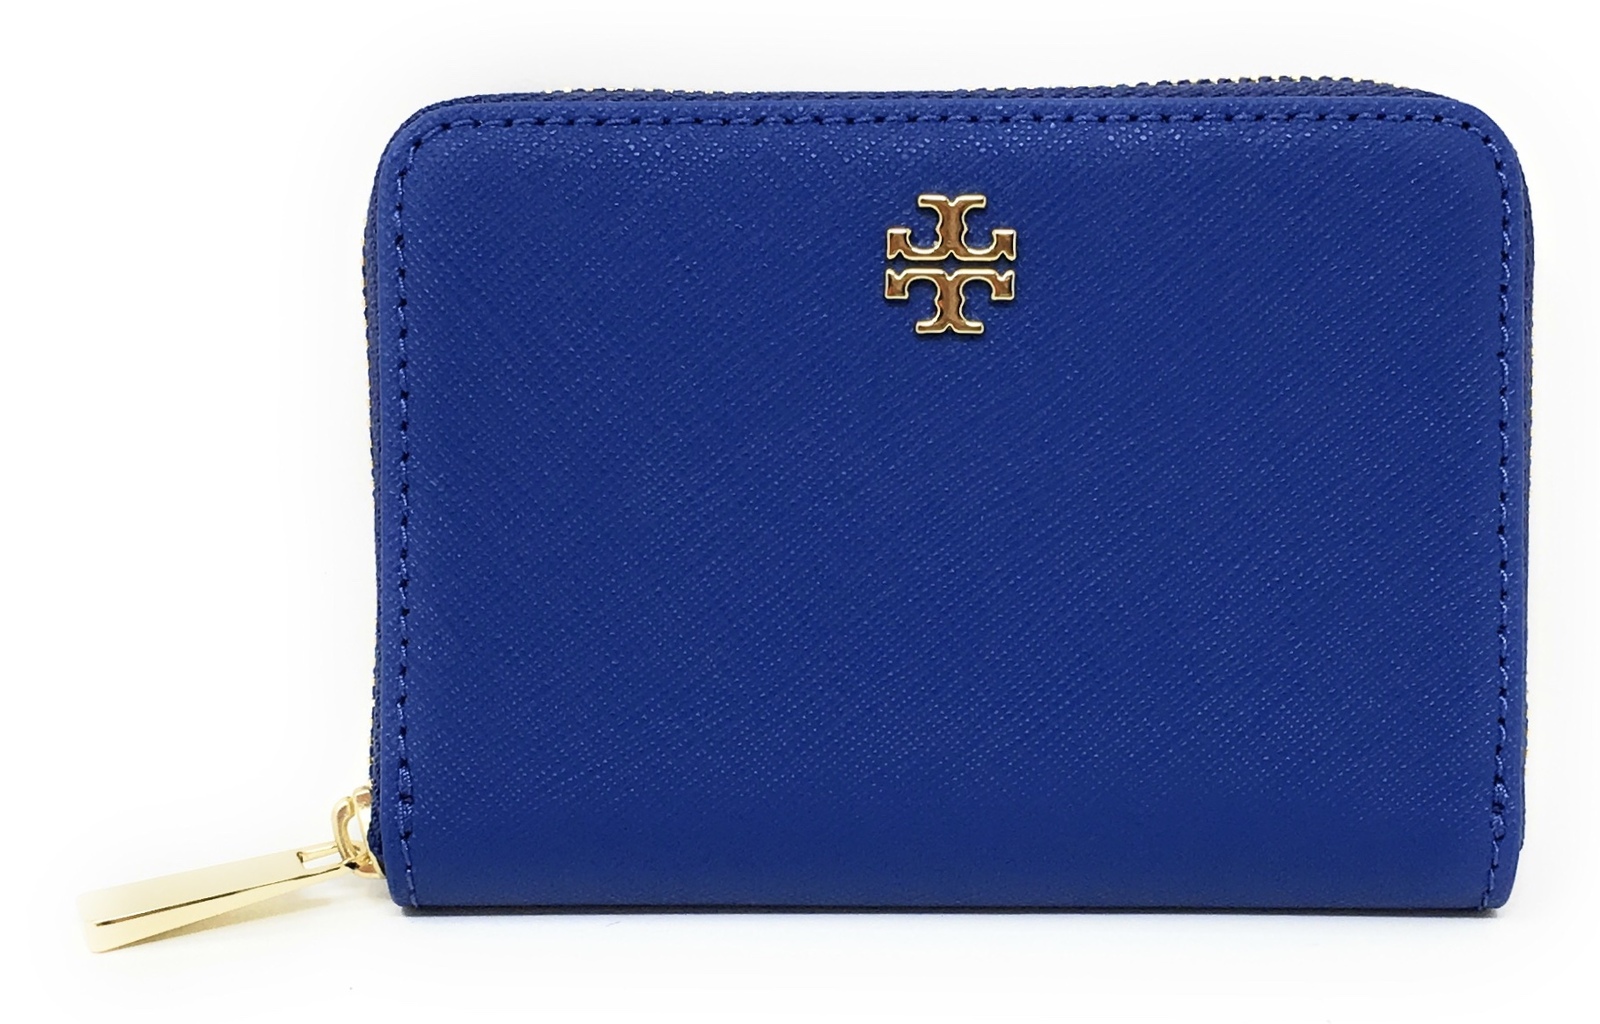 New Tory Burch Emerson Wristlet Pouch Wallet Saffiano Leather